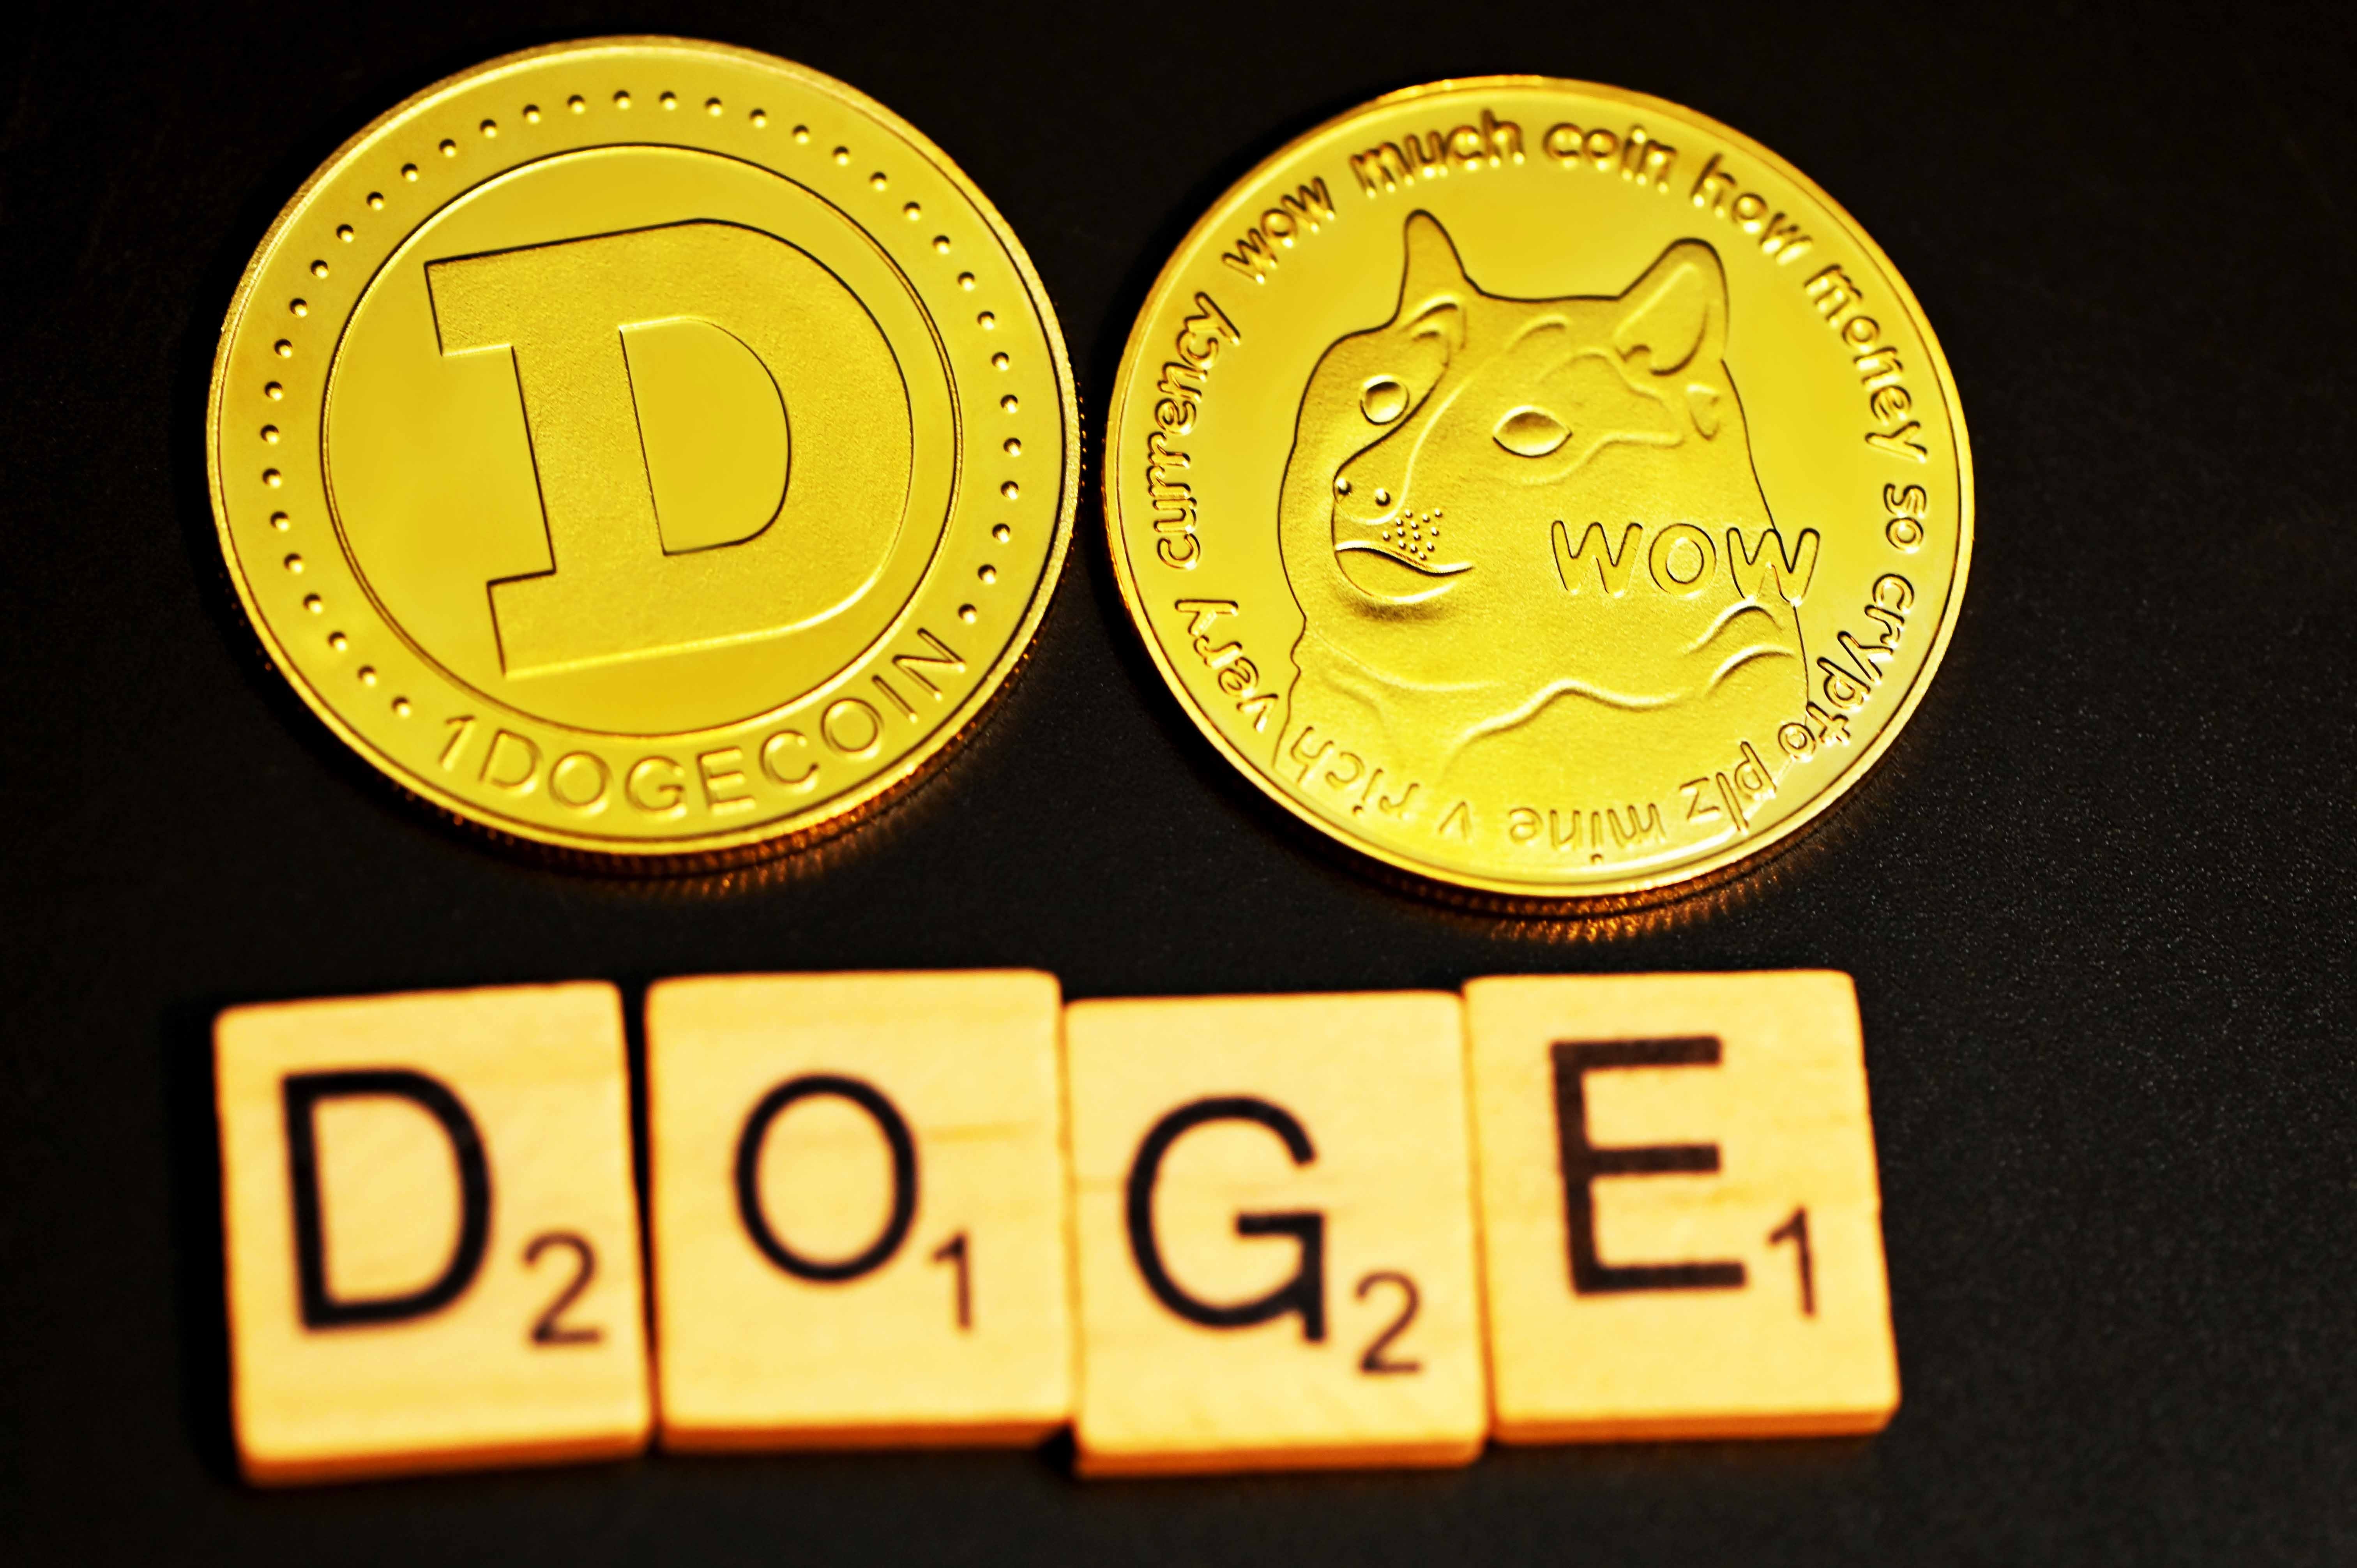 Dogecoin Among Top 10 Cryptos Purchased By Whales: Here's What Jim Cramer Has To Say About Its Future